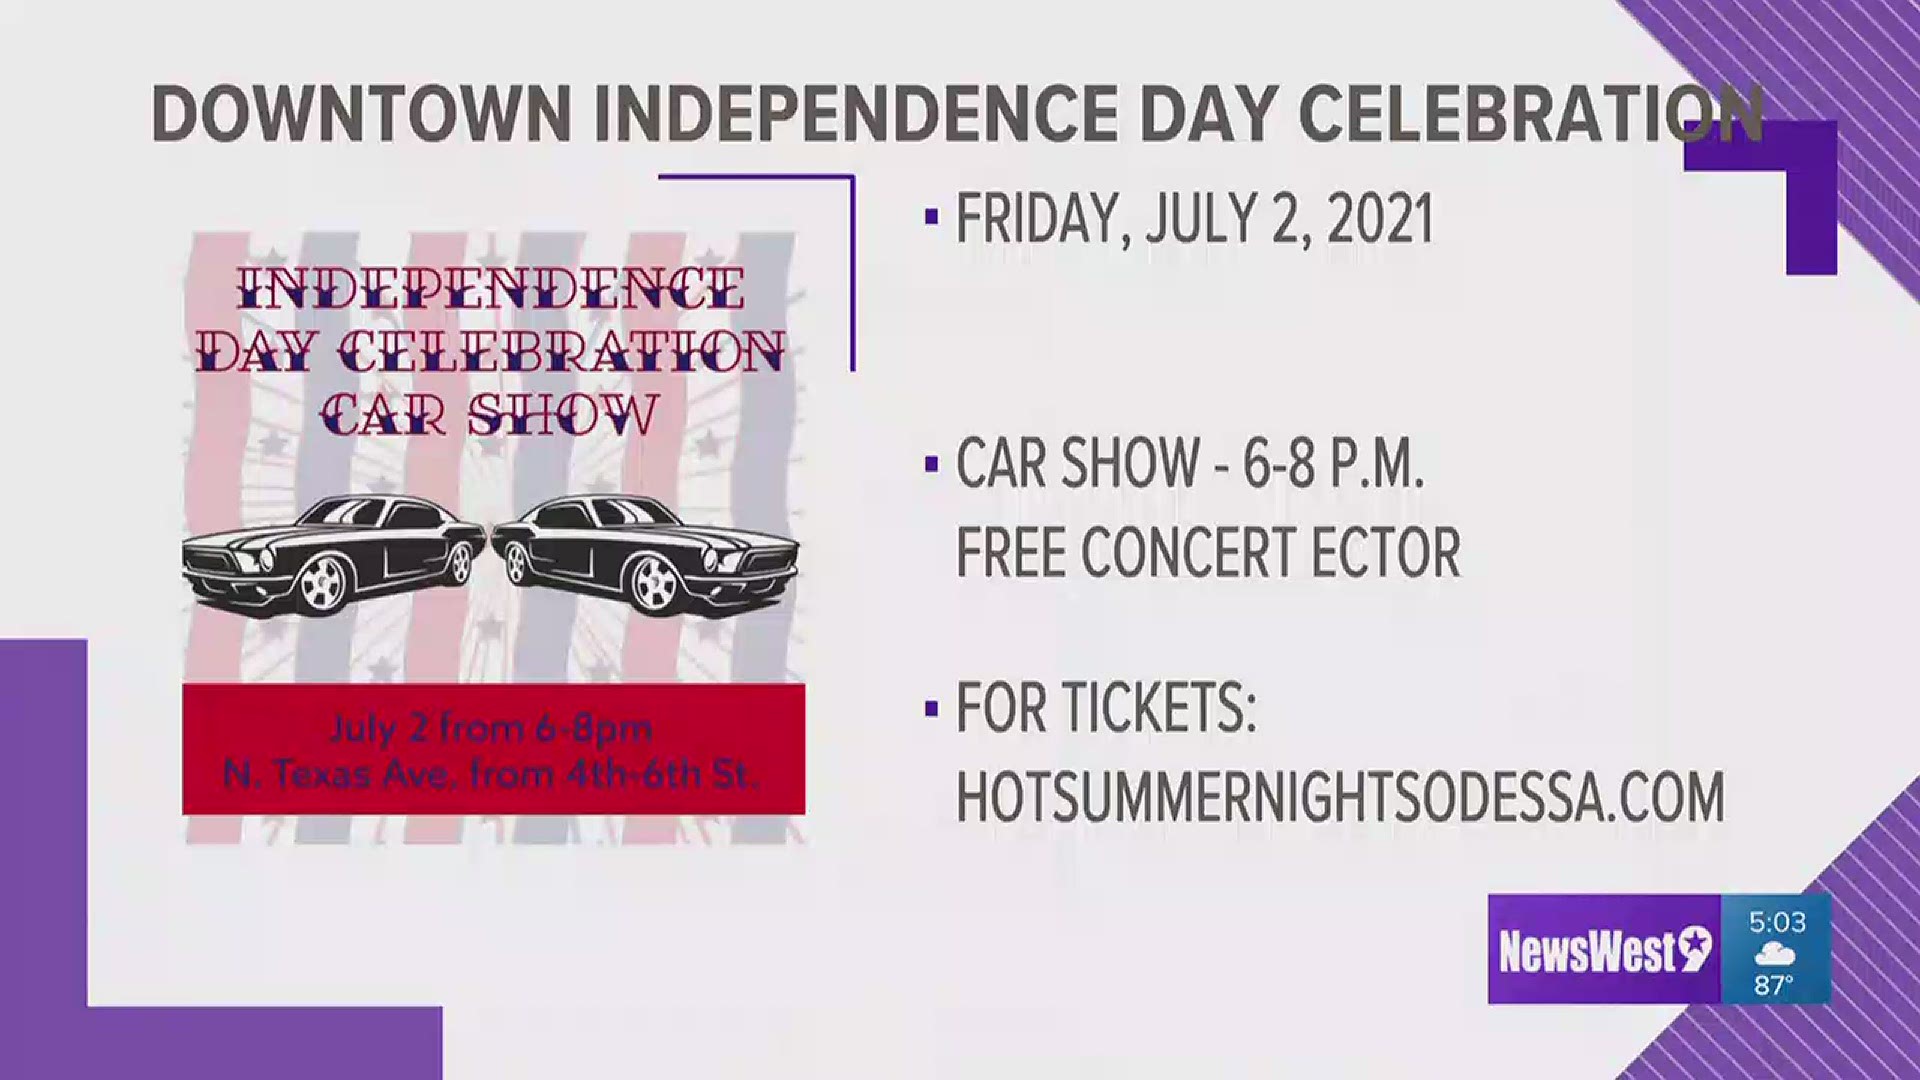 Here is a list of events going on around West Texas for July 4th weekend.